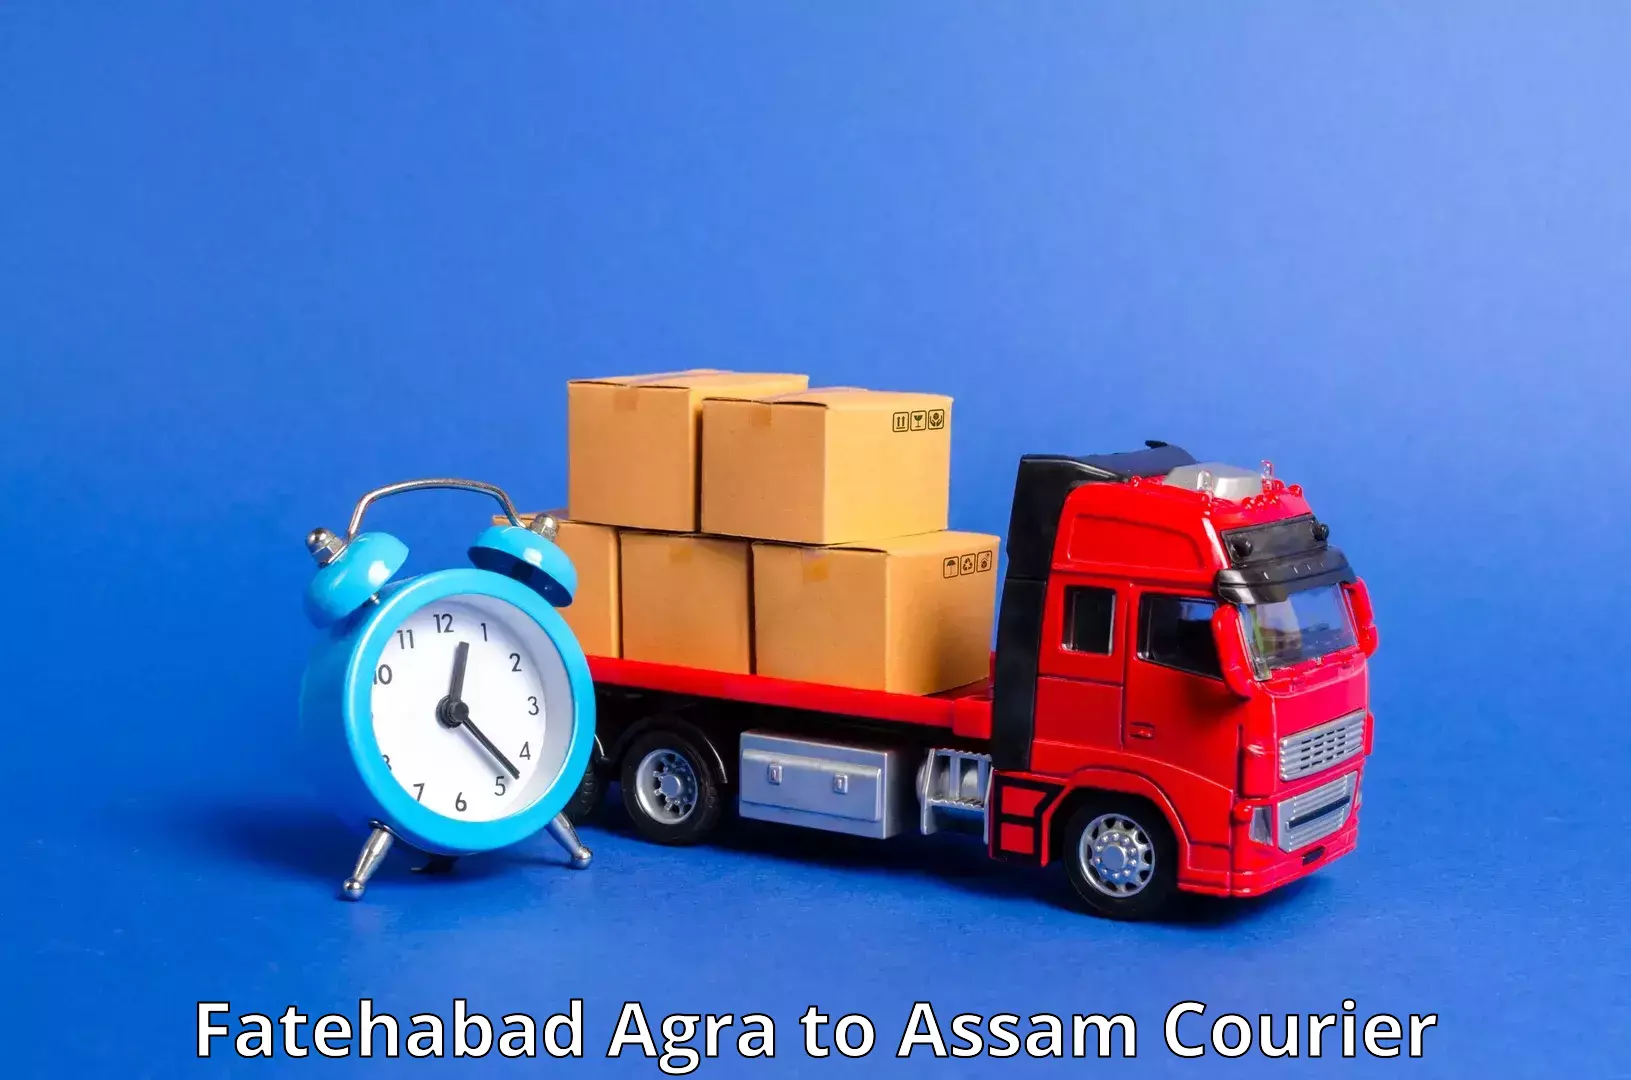 Next-day delivery options Fatehabad Agra to Cachar